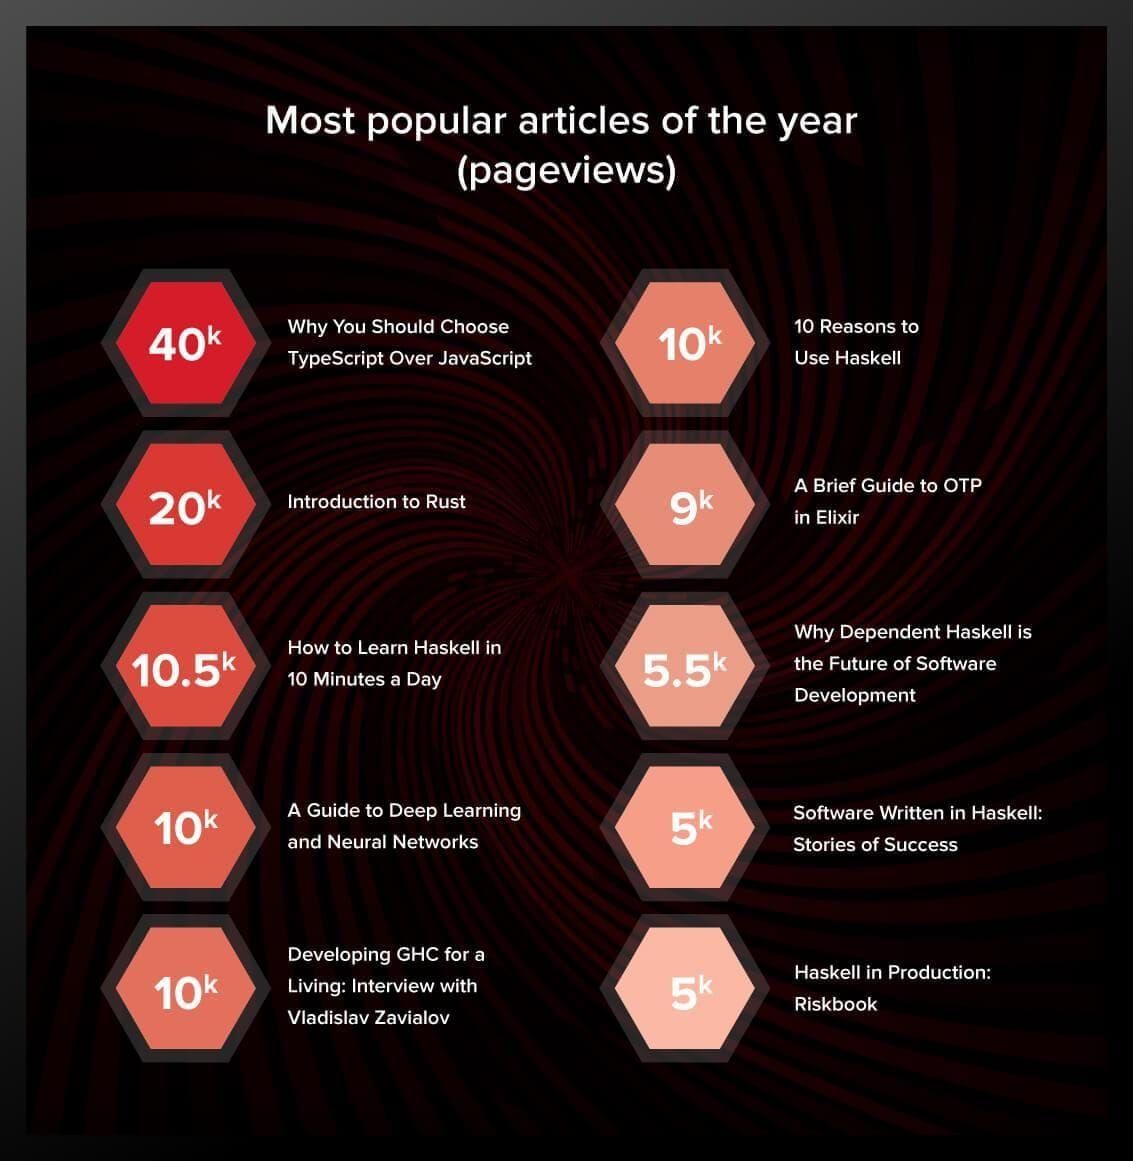 Top 10 articles by pageviews